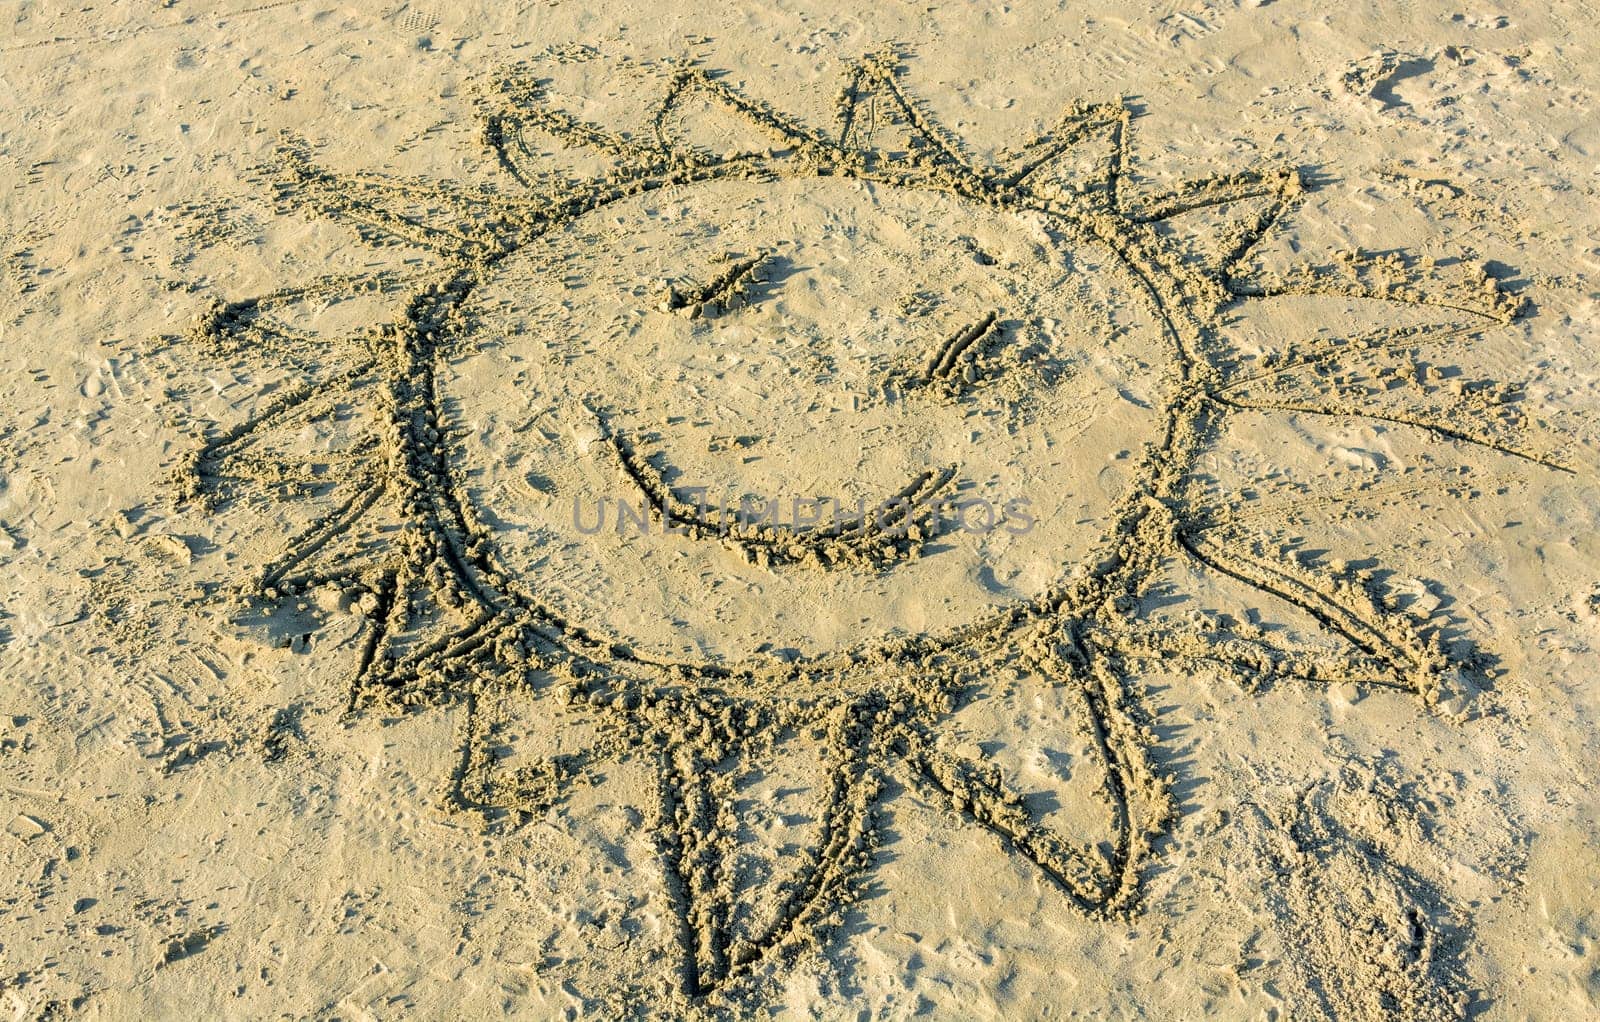 Child's drawing of smiling sun on the sand of Pacific ocean beach